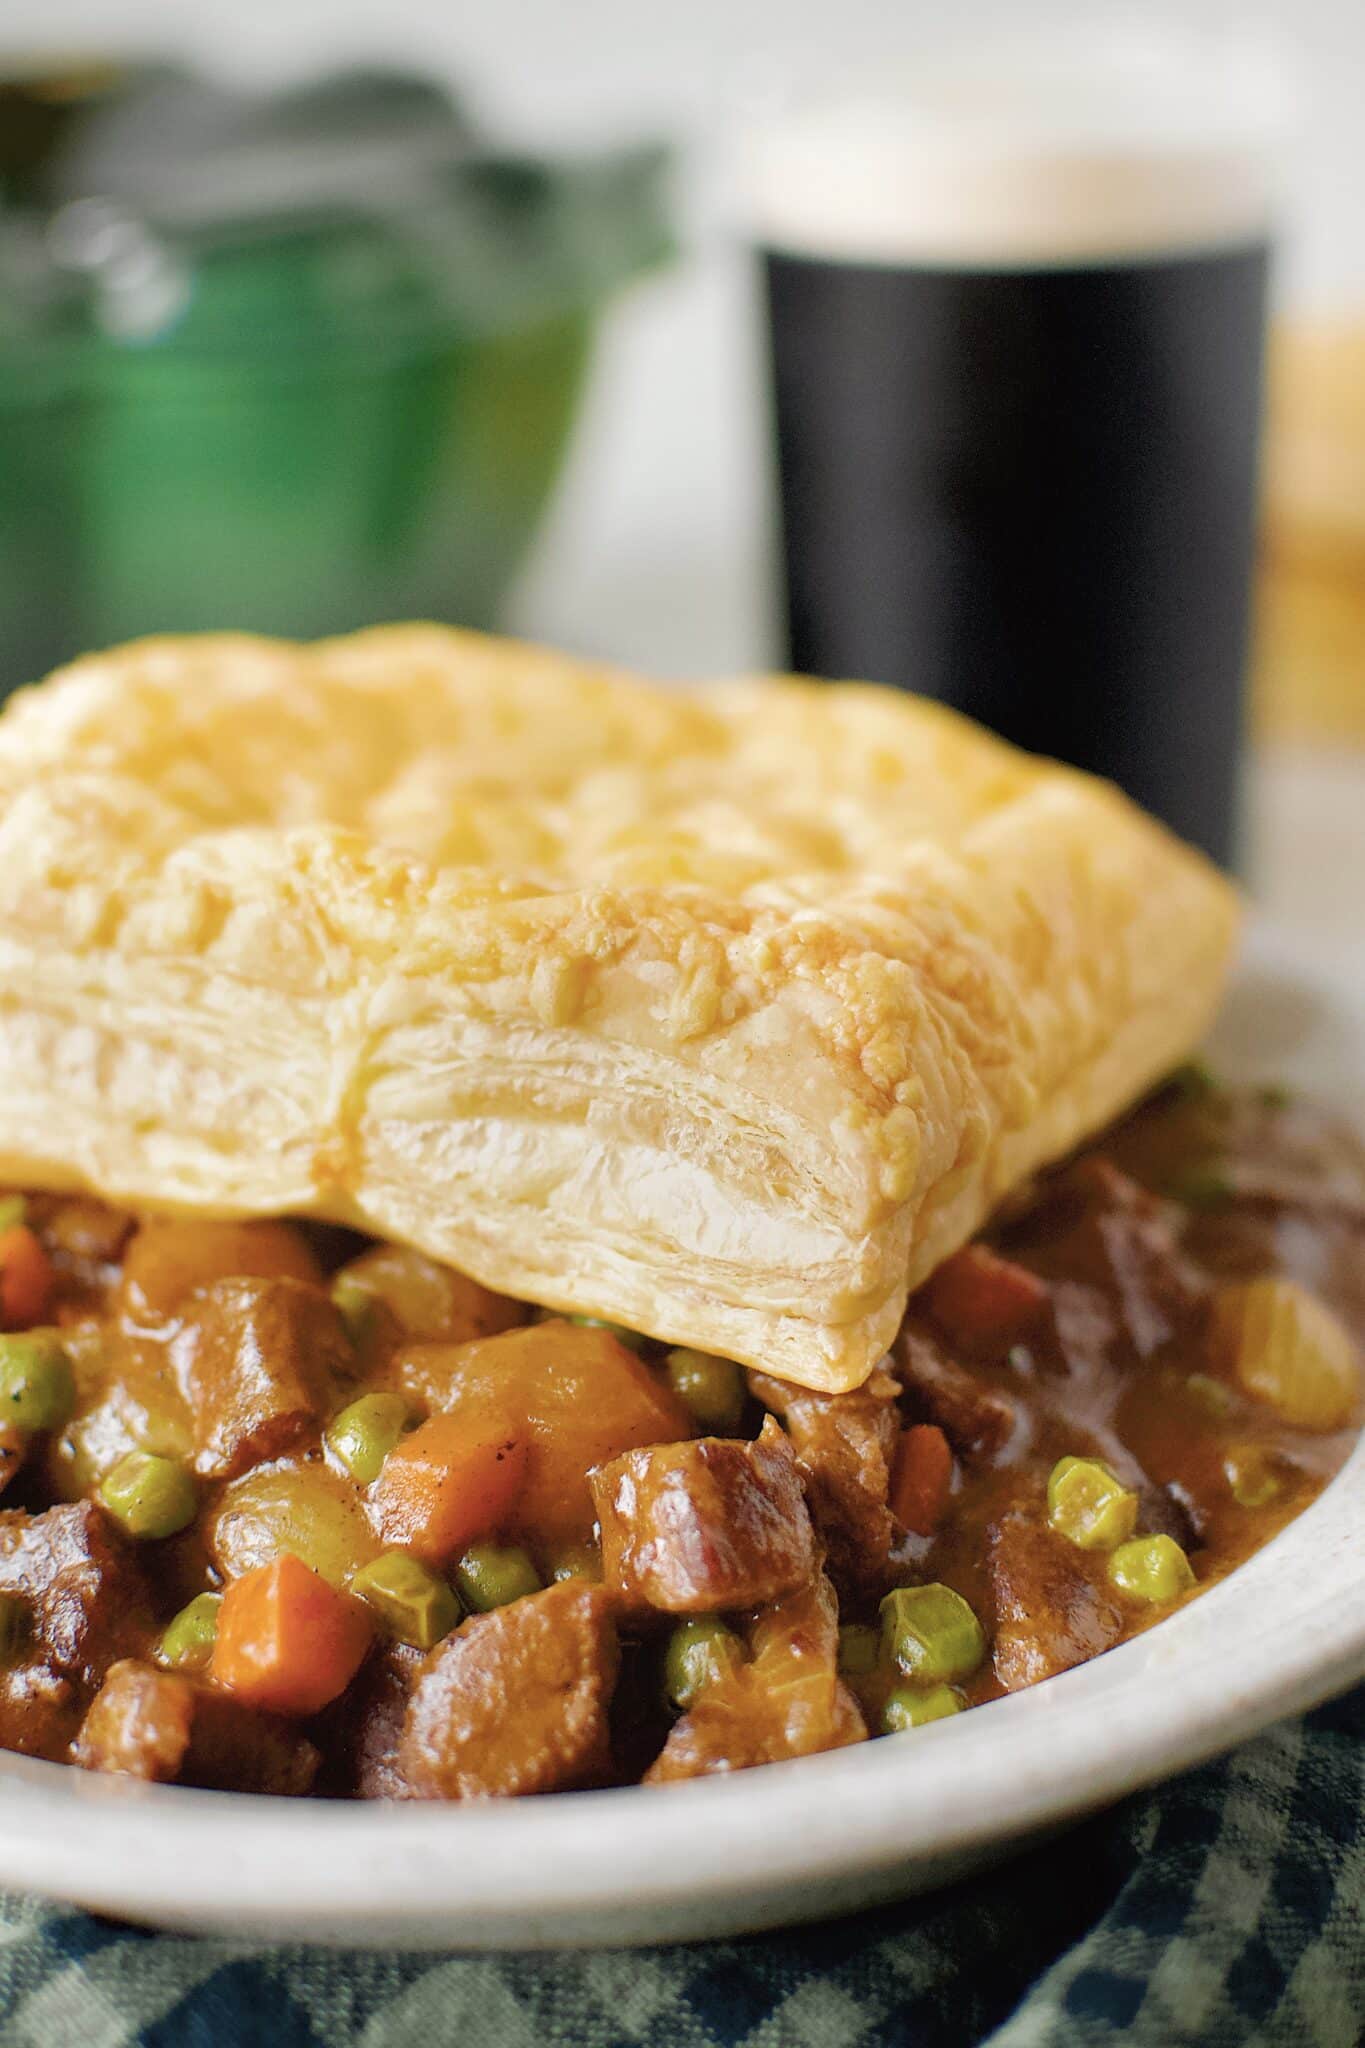 Beef Pot Pie topped with an Irish Cheddar Puff Pastry Square, ready to eat with a Guinness in the background.